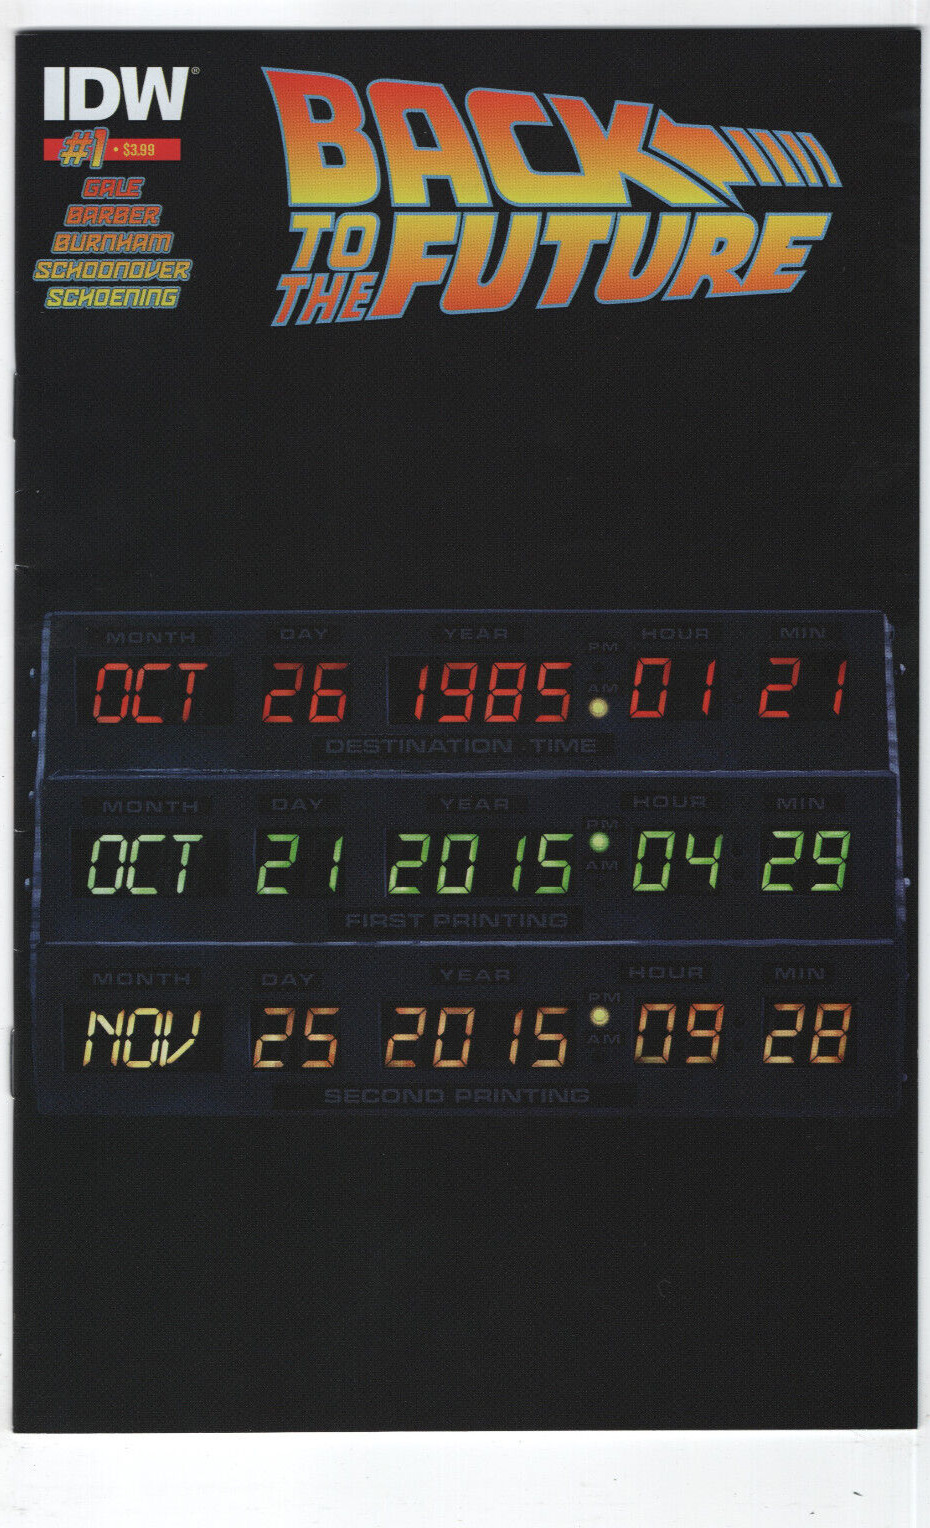 Back To The Future #1 2nd Print Flux Capacitor Clock Variant 2015 Comics IDW